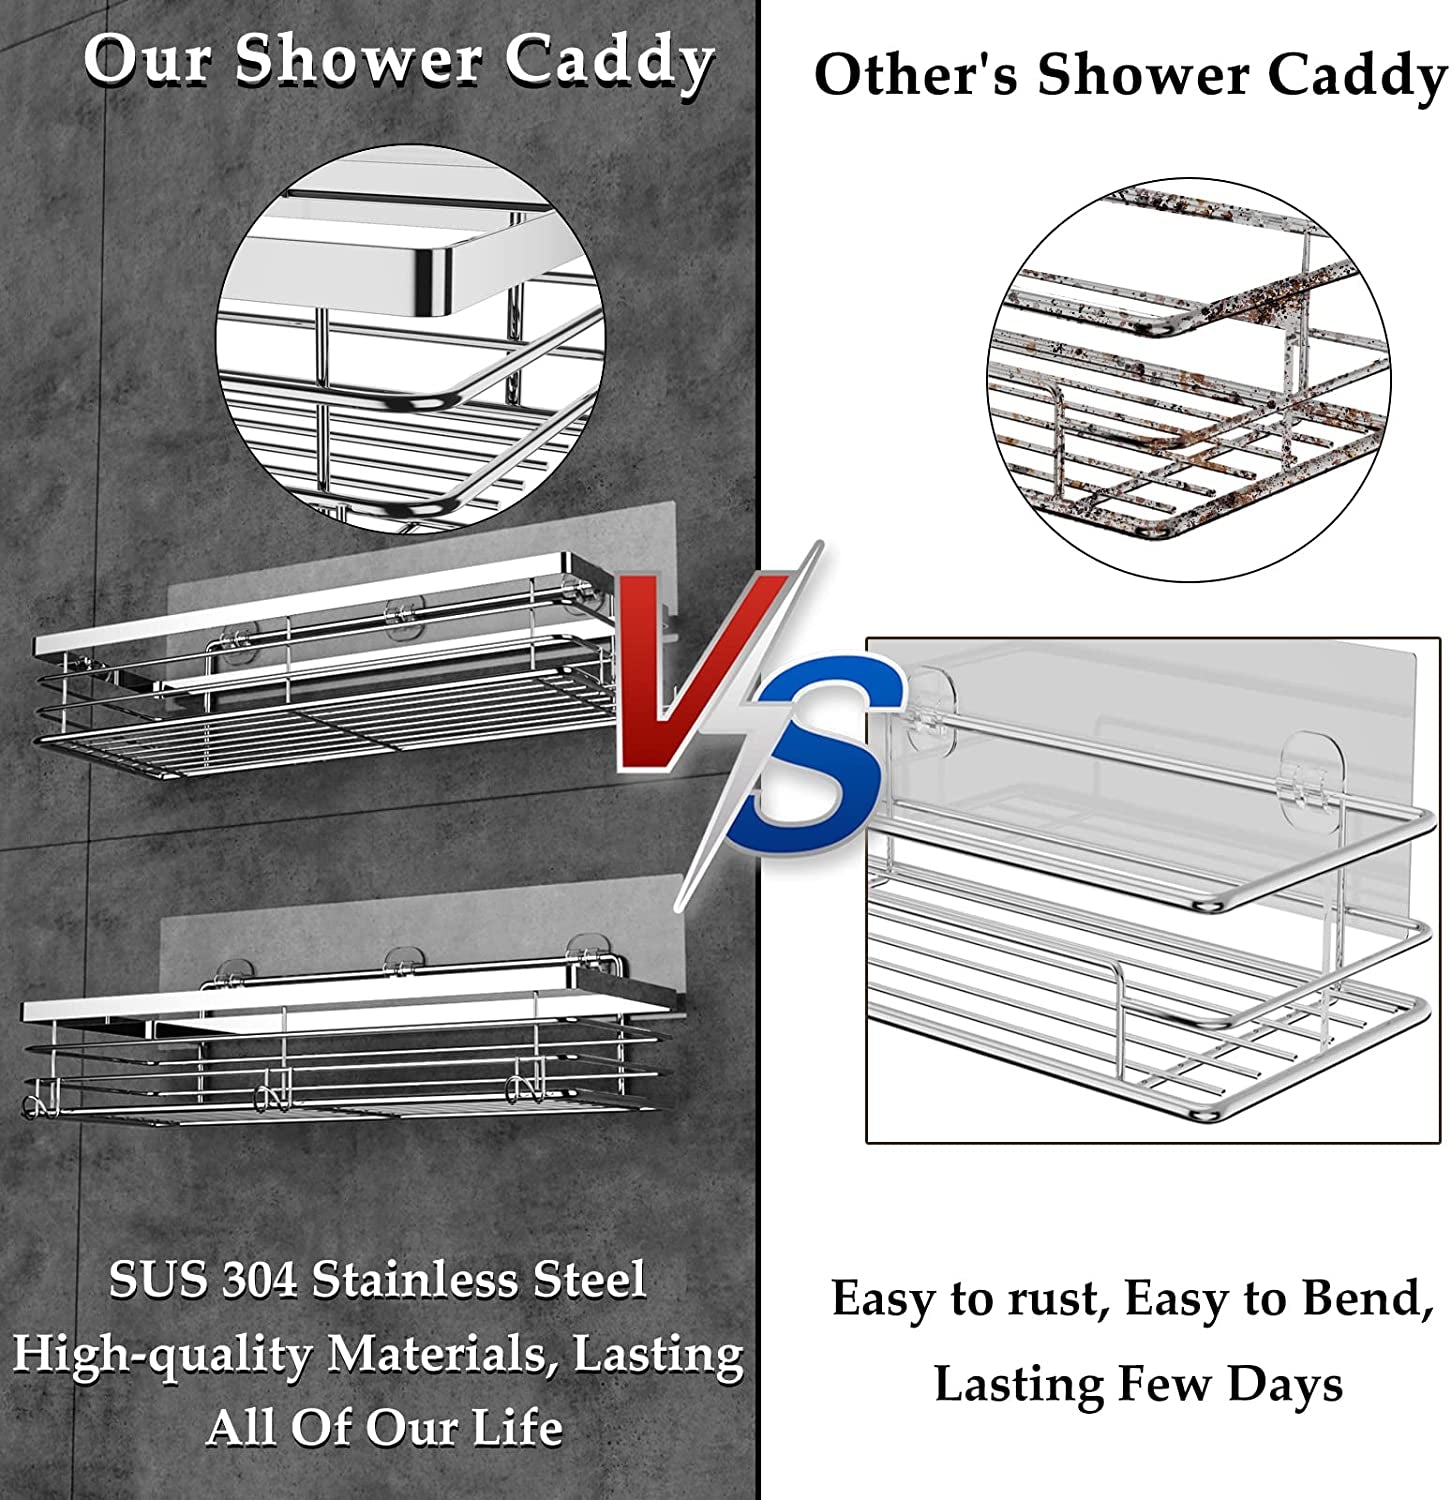 Shower Caddy with 5 Hooks for Hanging Razor and Sponge Adhesive Shower Shelf Bathroom Accessories Organiser Storage Kitchen Rack No Drilling Stainless Steel - 2 Pack